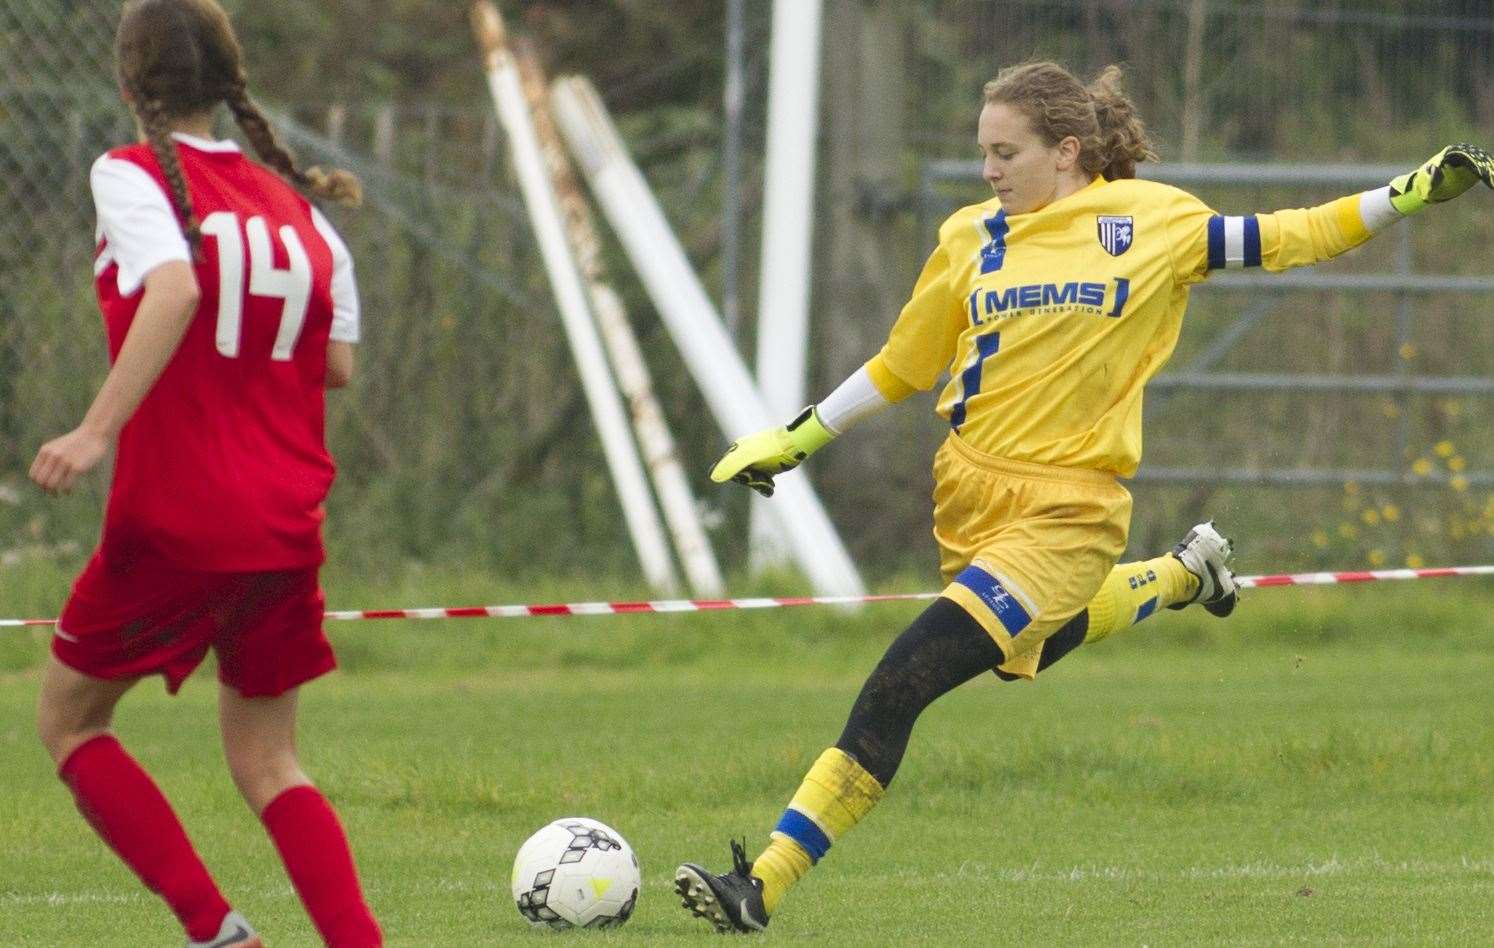 Katie Startup used to play for the Gillingham women's team